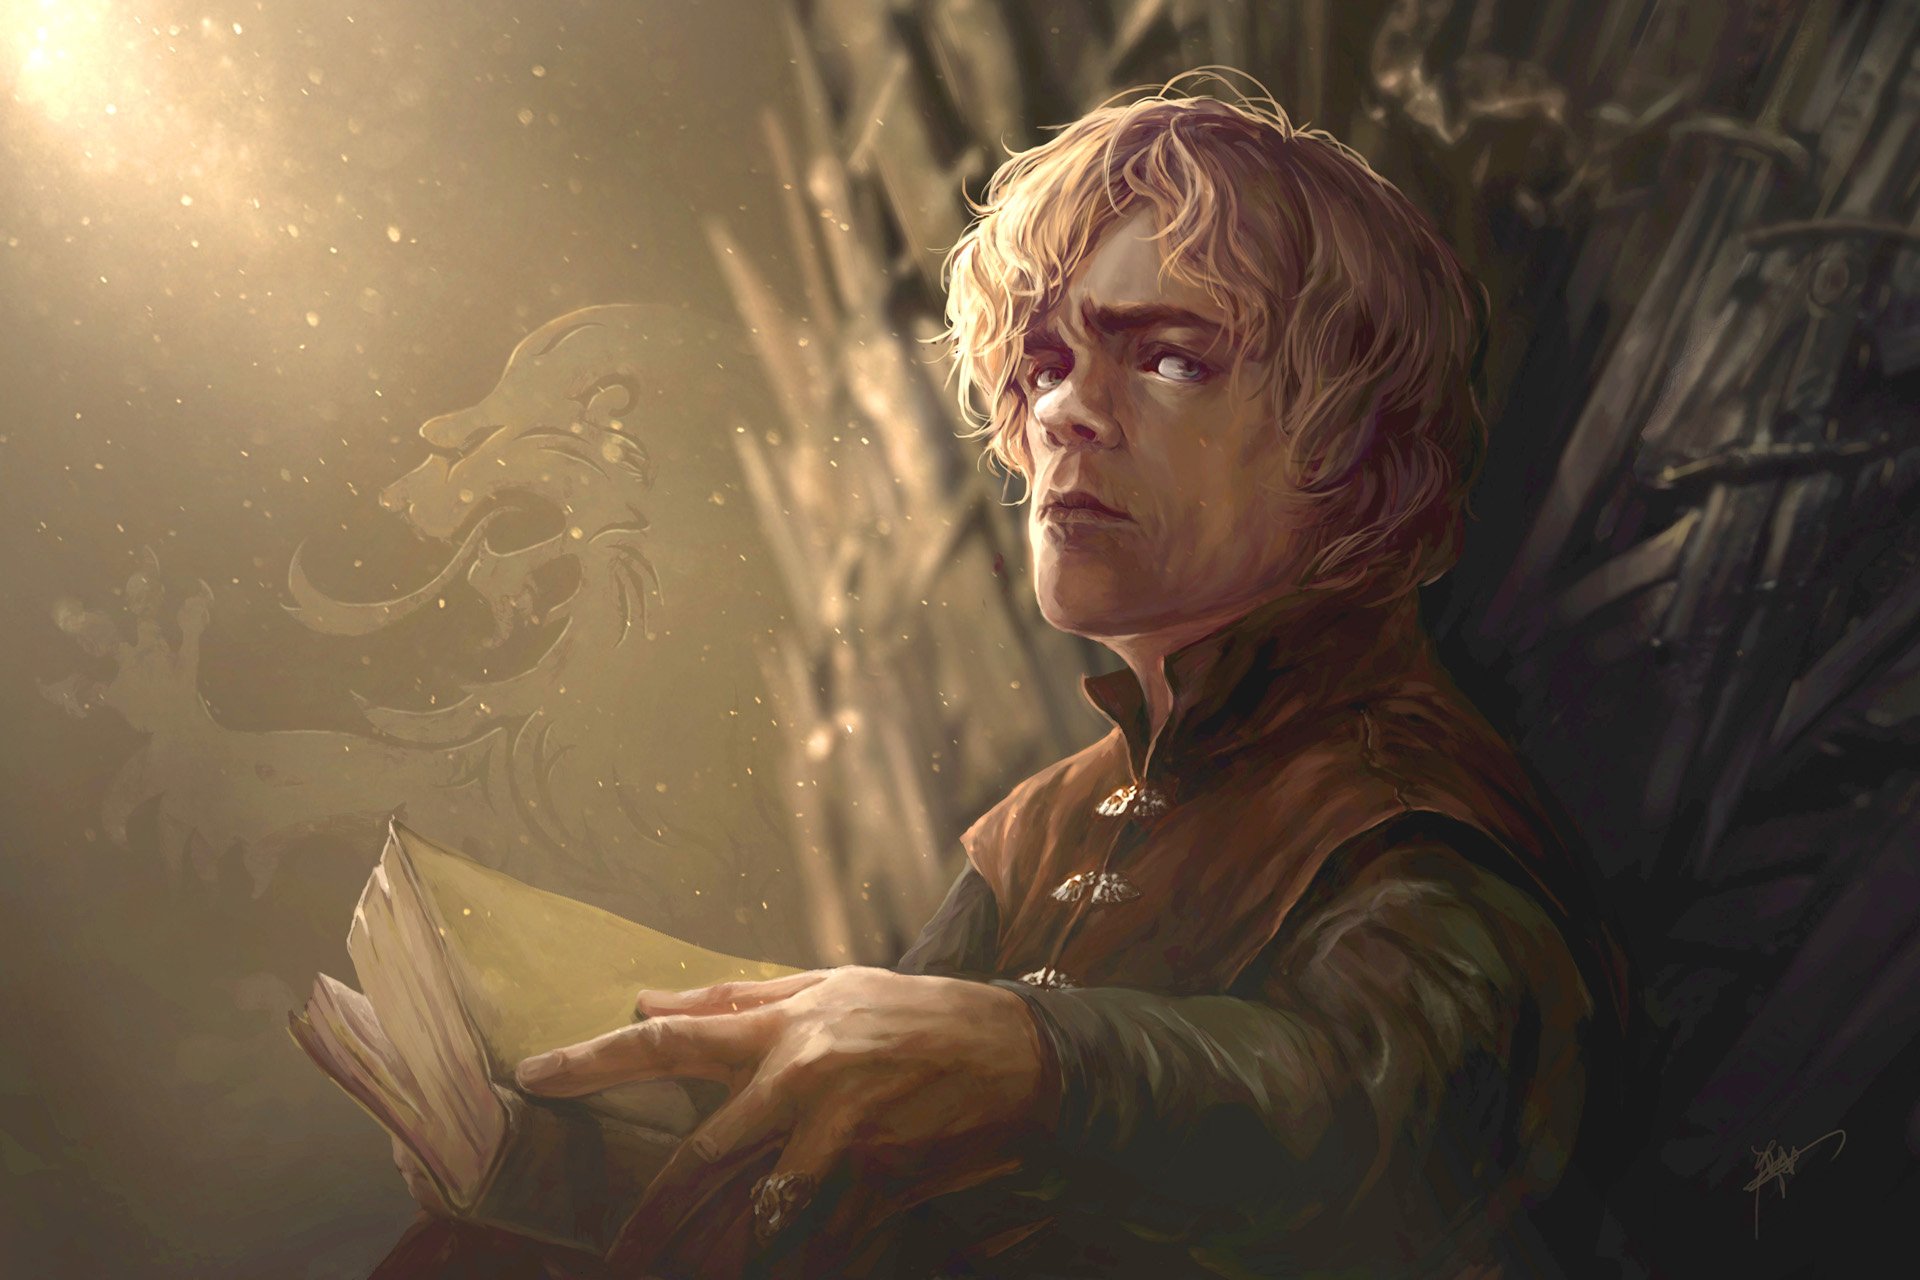 Tyrion Game Of Thrones Season 7 Wallpapers